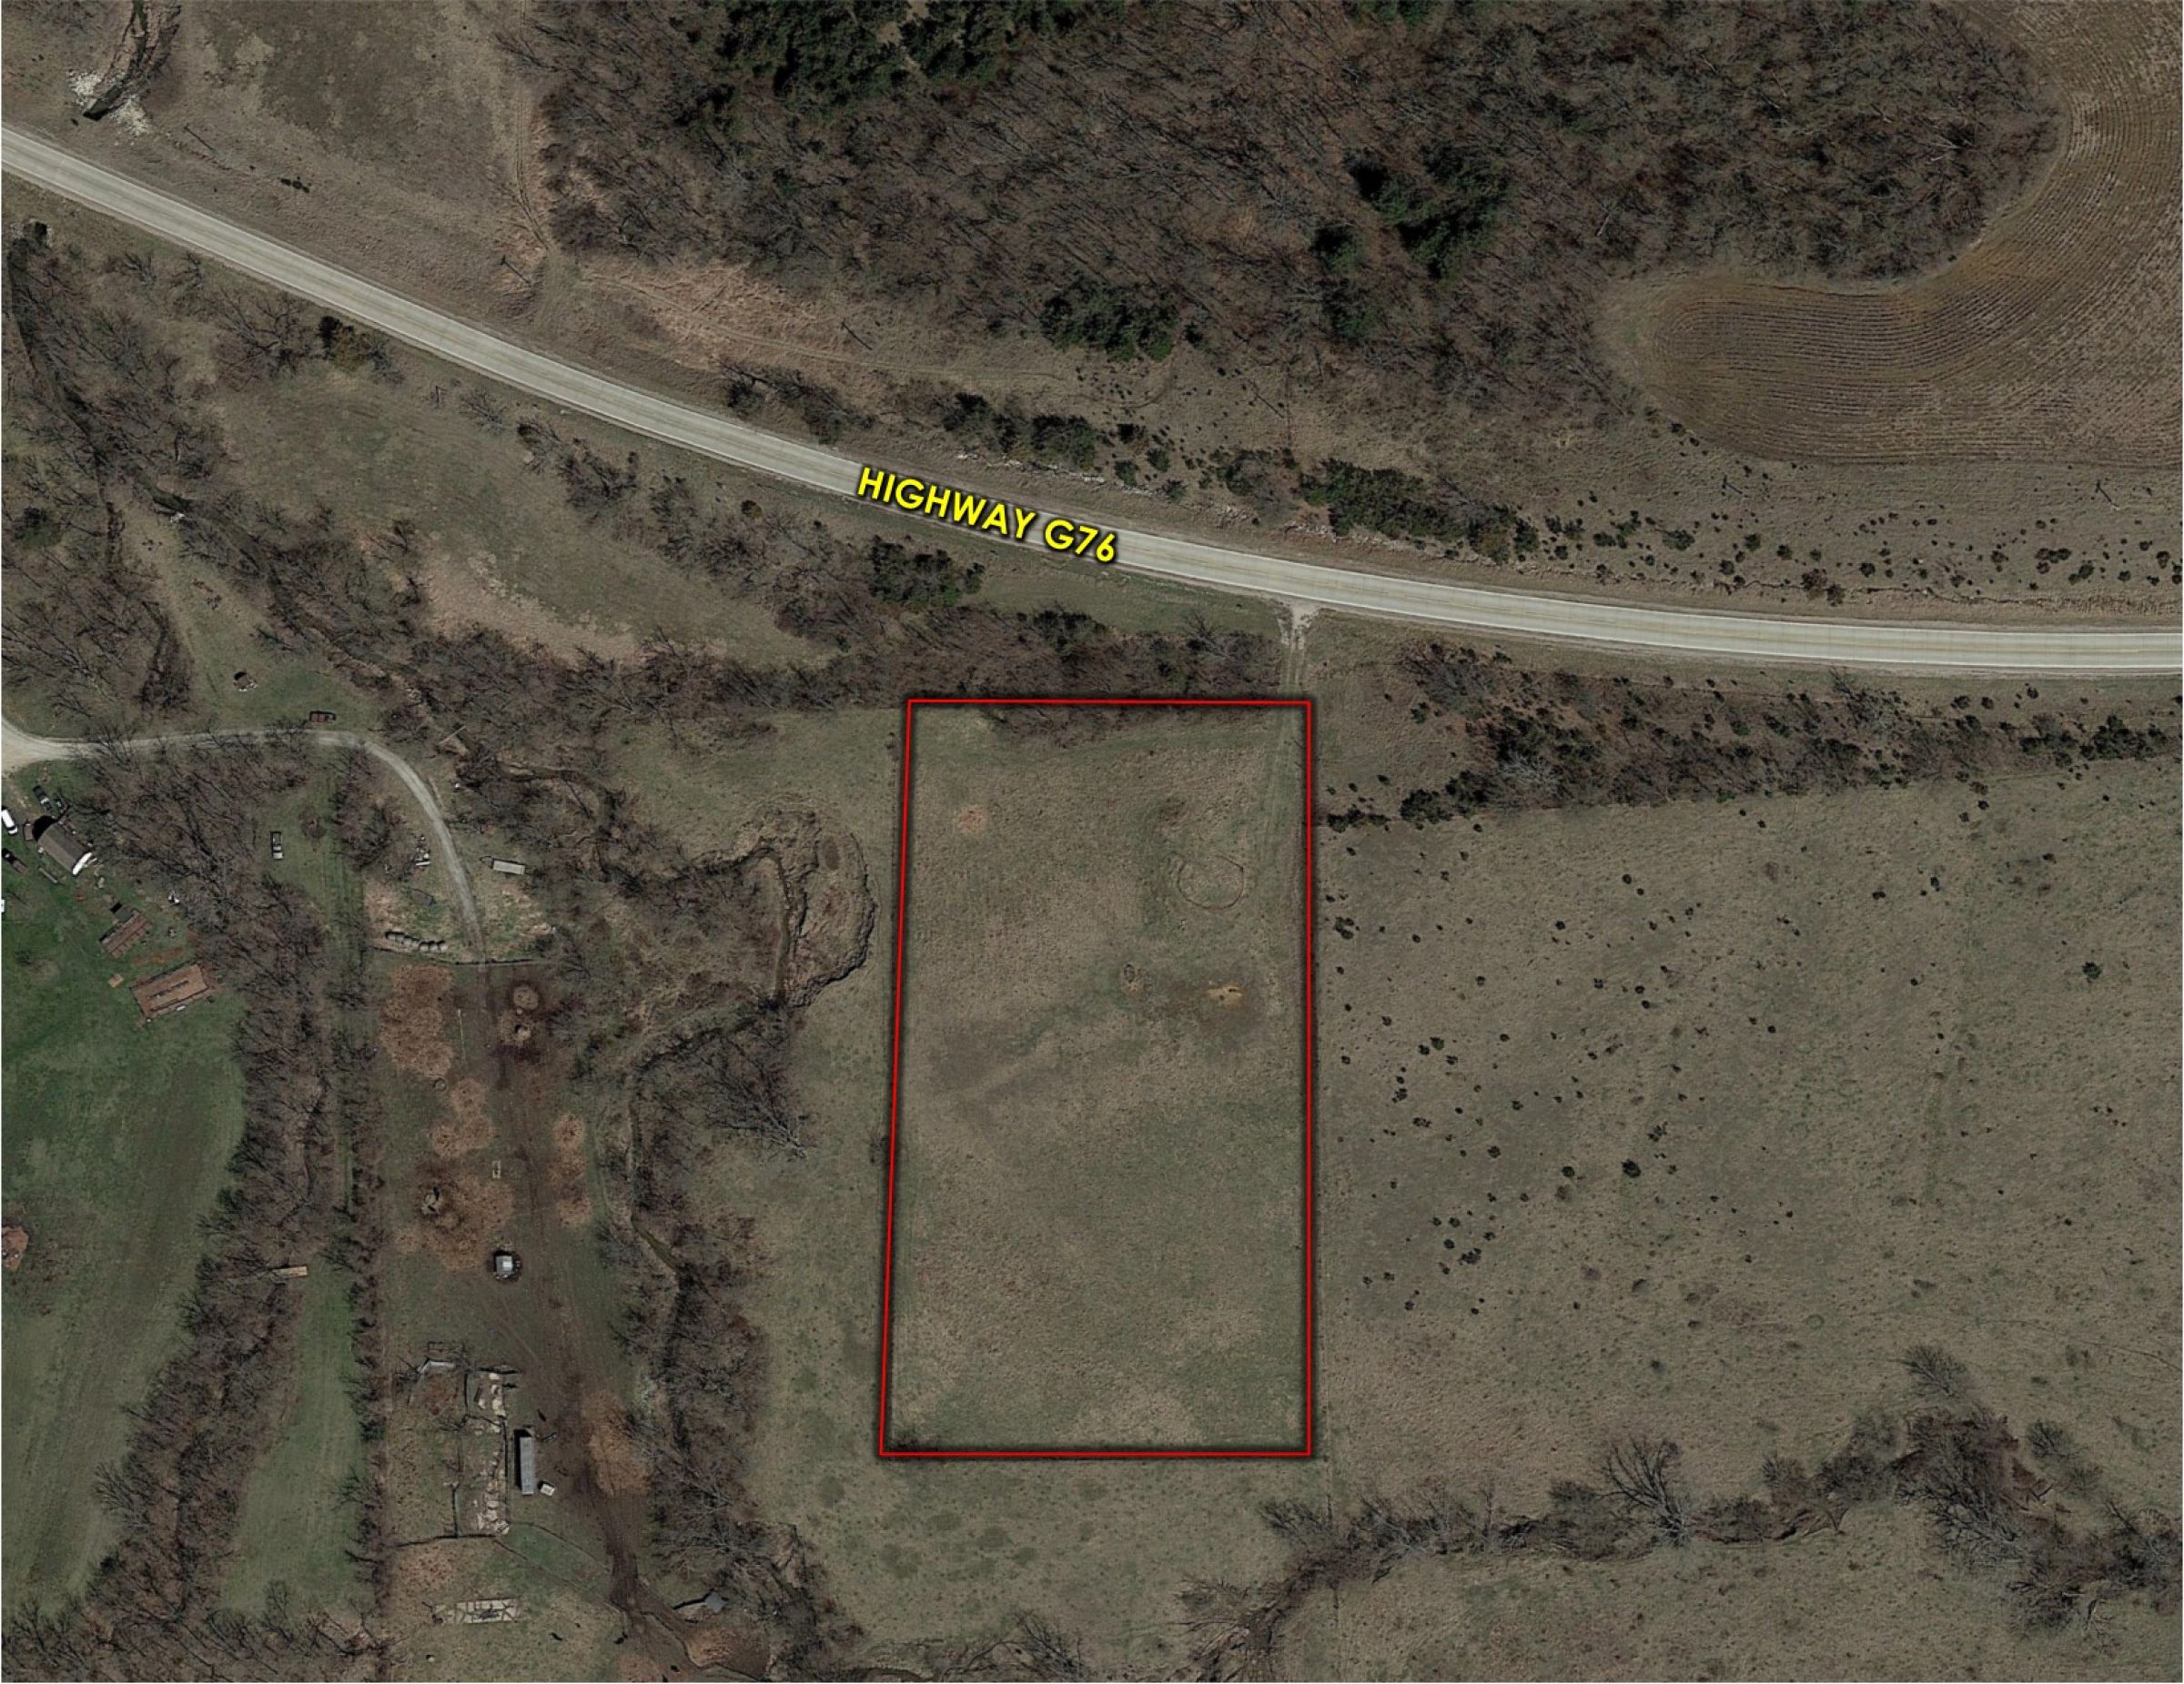 Peoples Company Acreage for Sale - #14547-15002-g76-highway-lacona-50139